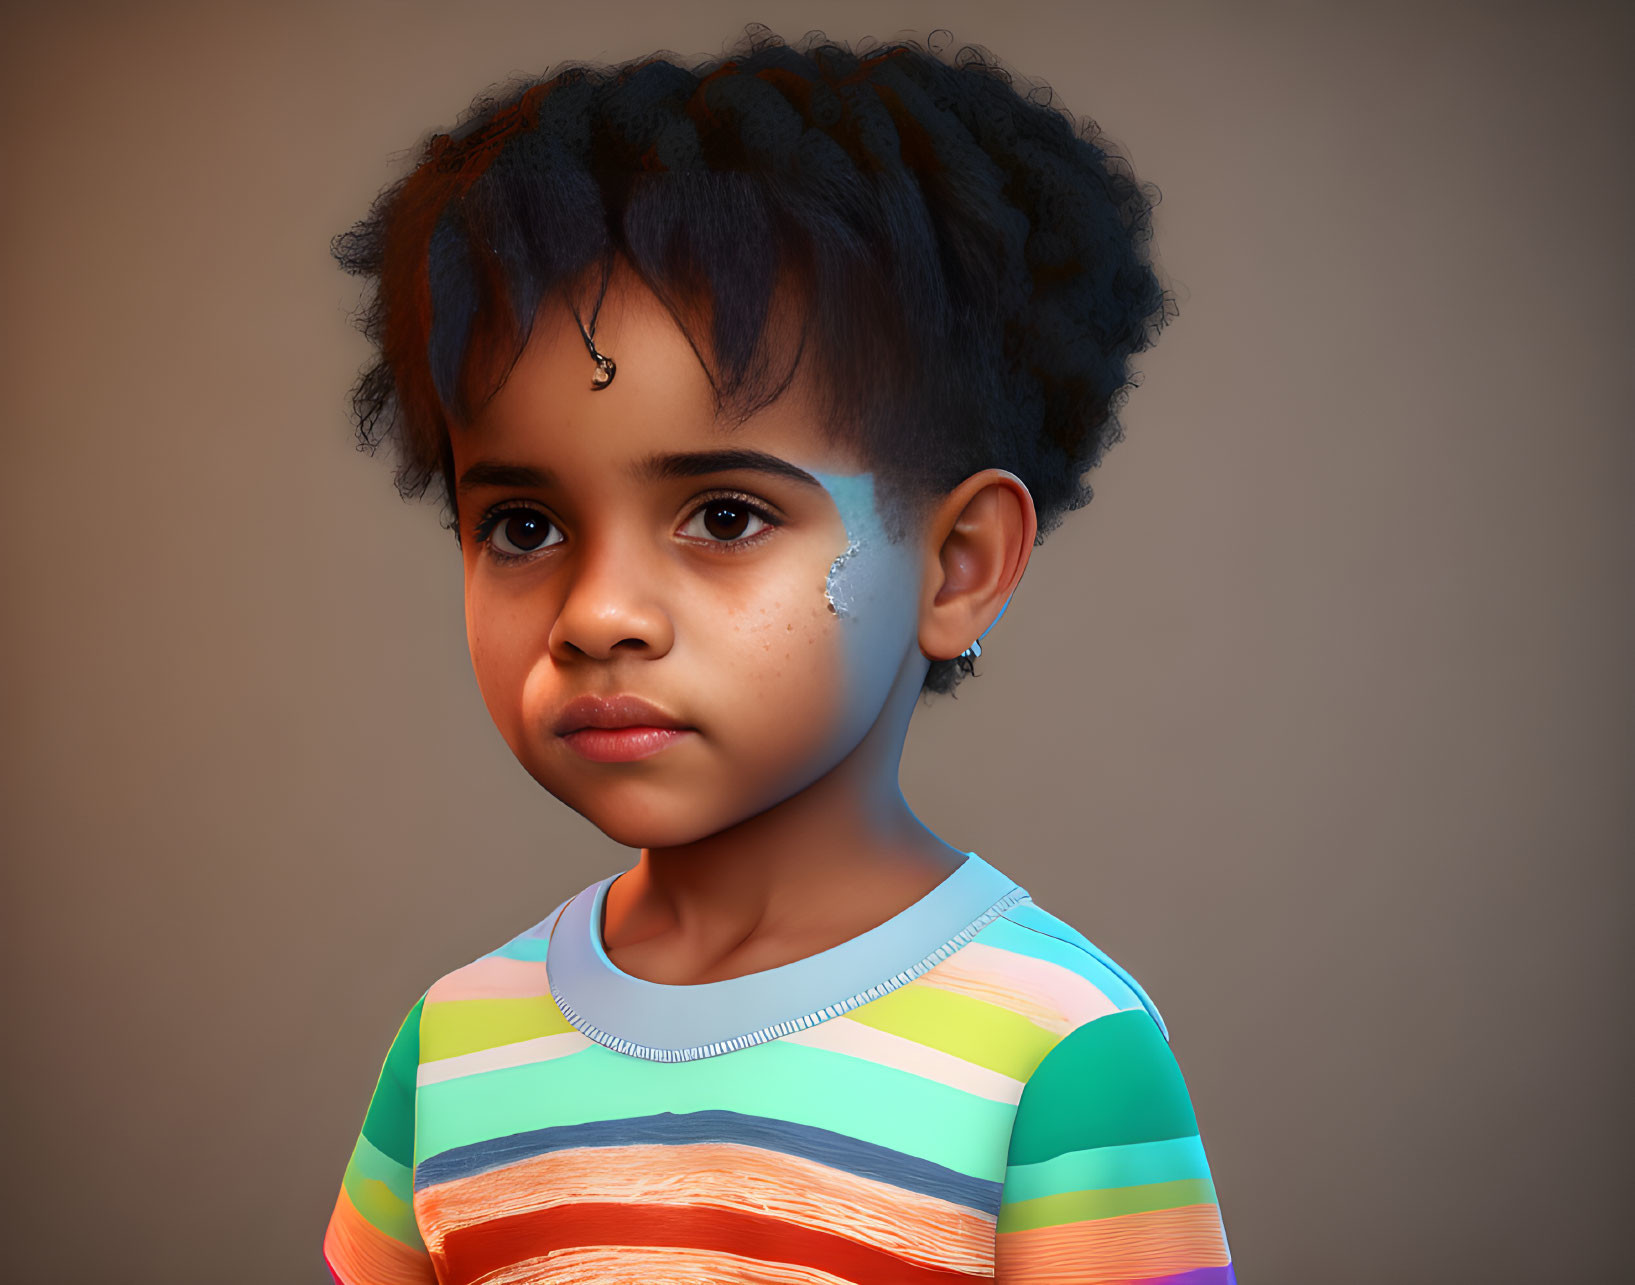 Child with textured hair and blue facial markings in colorful striped shirt